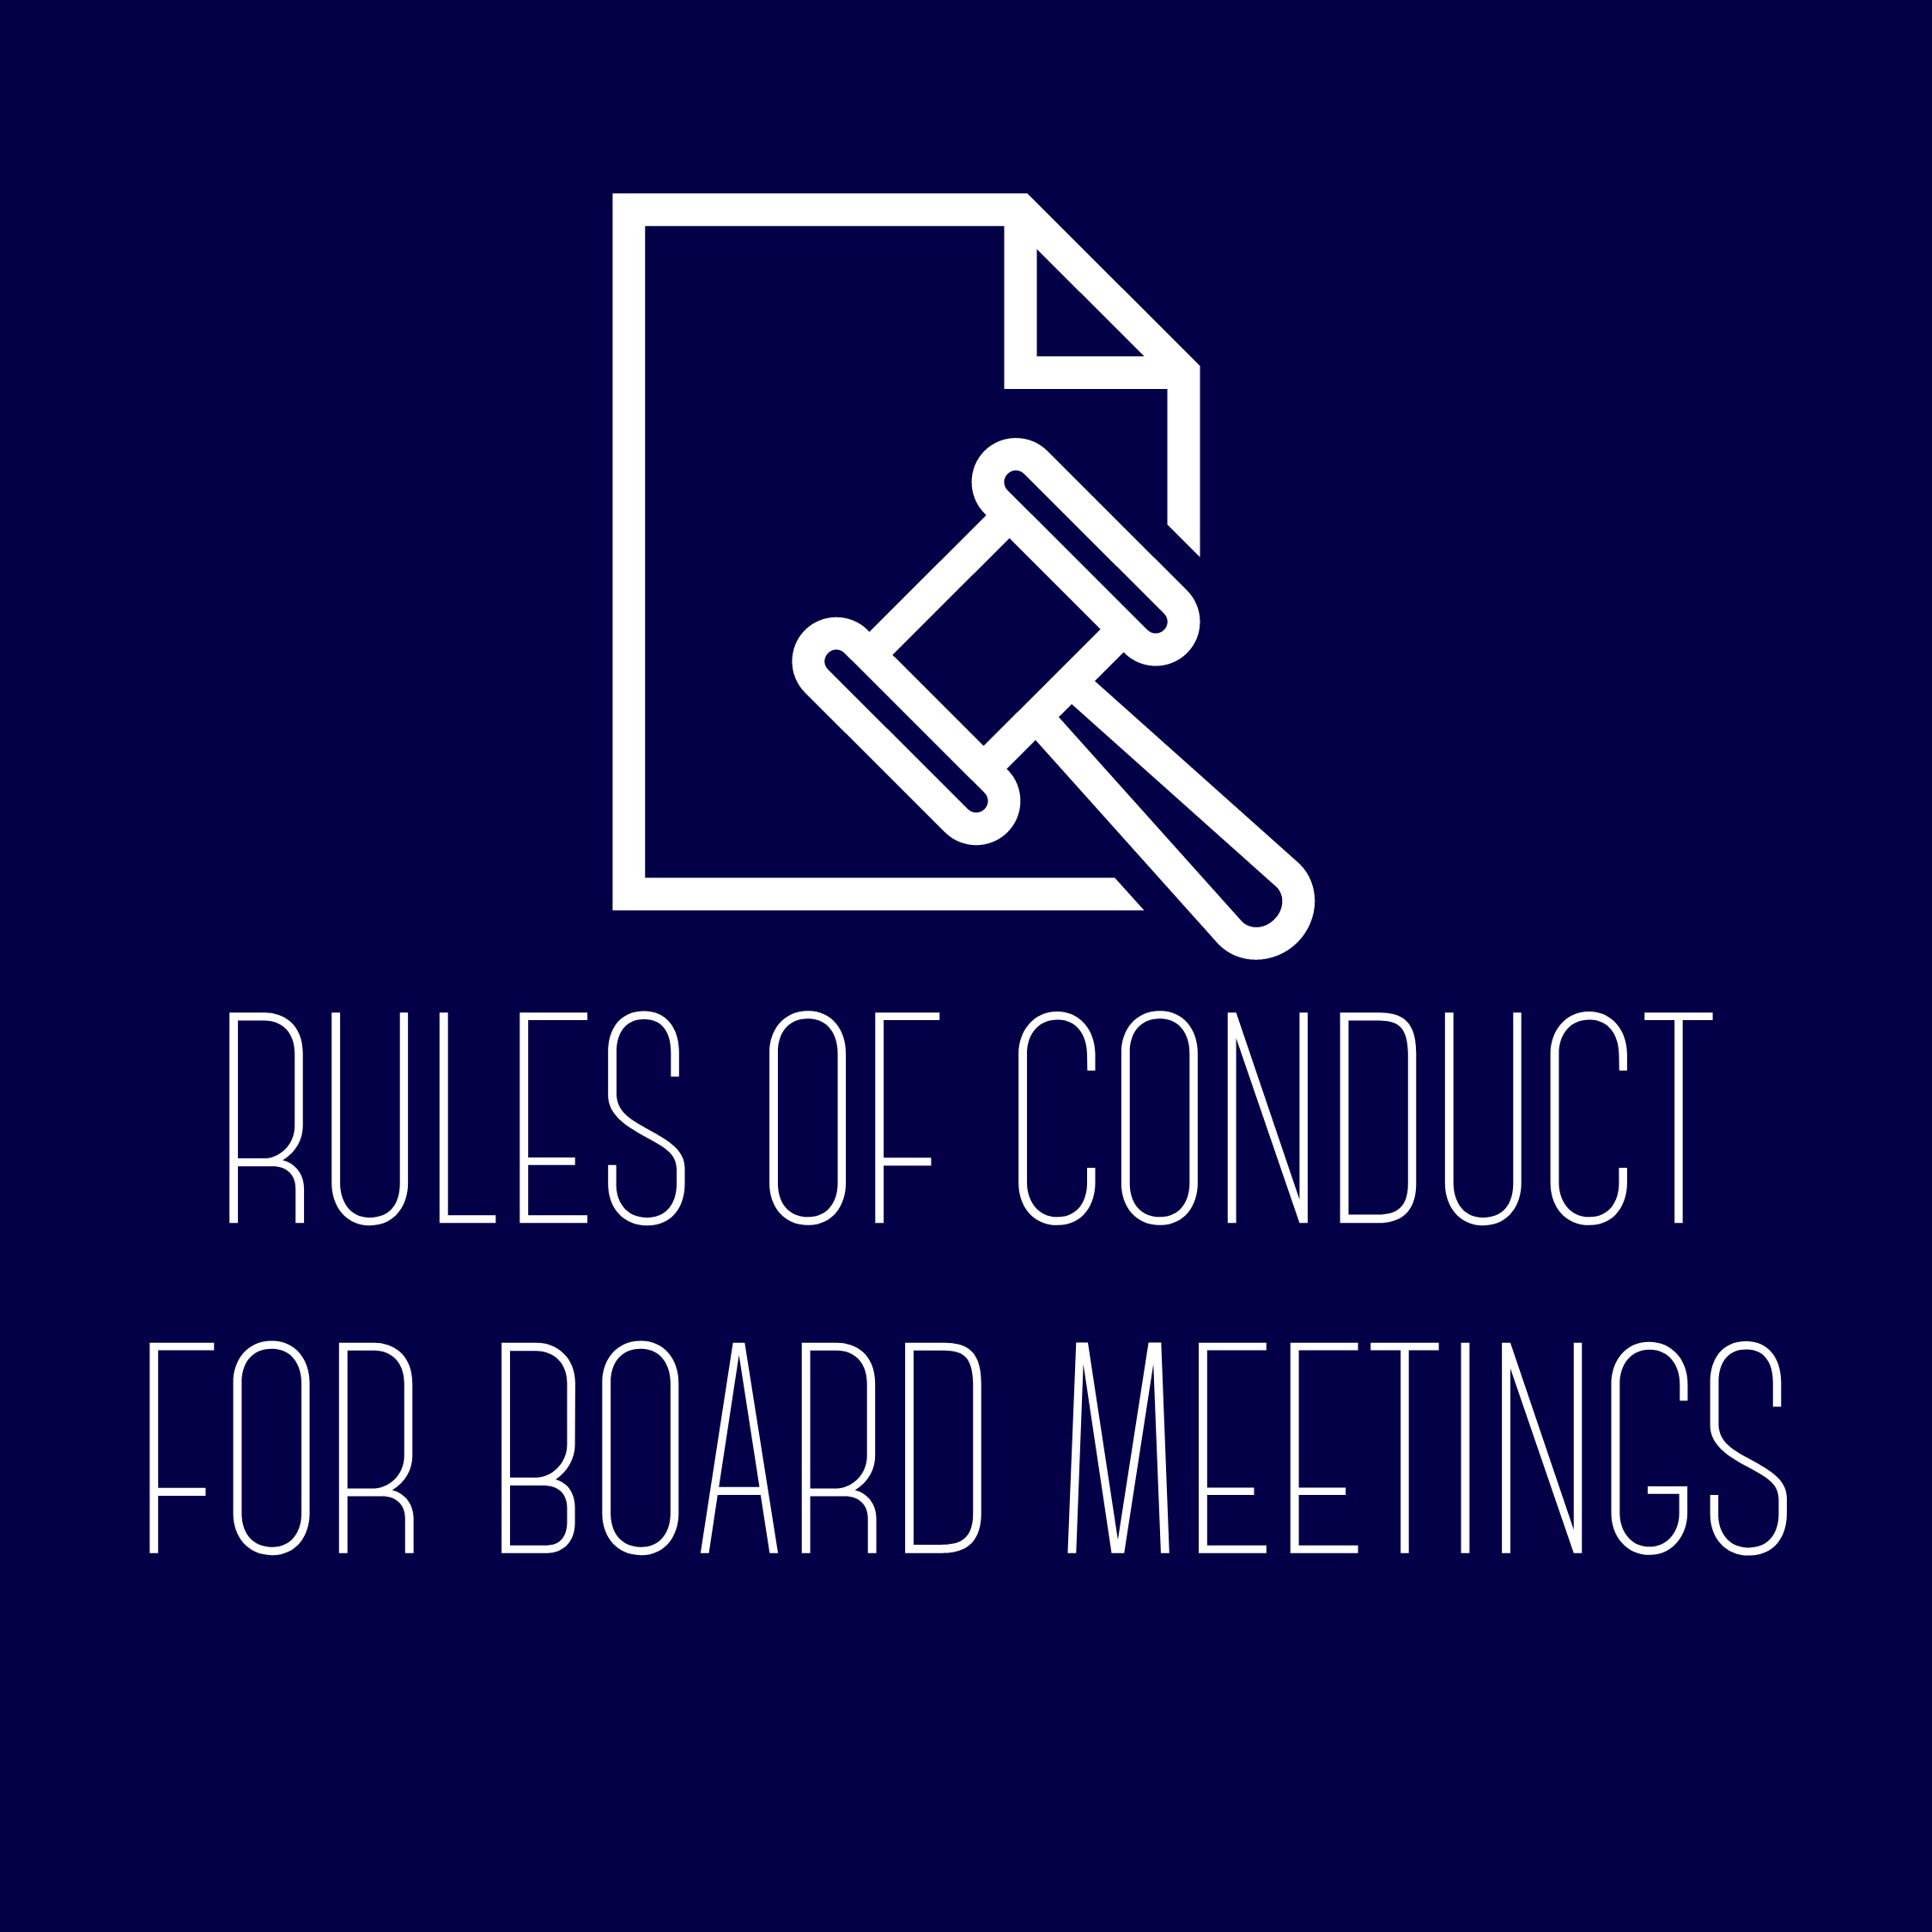 Rules of Conduct for Board Meetings